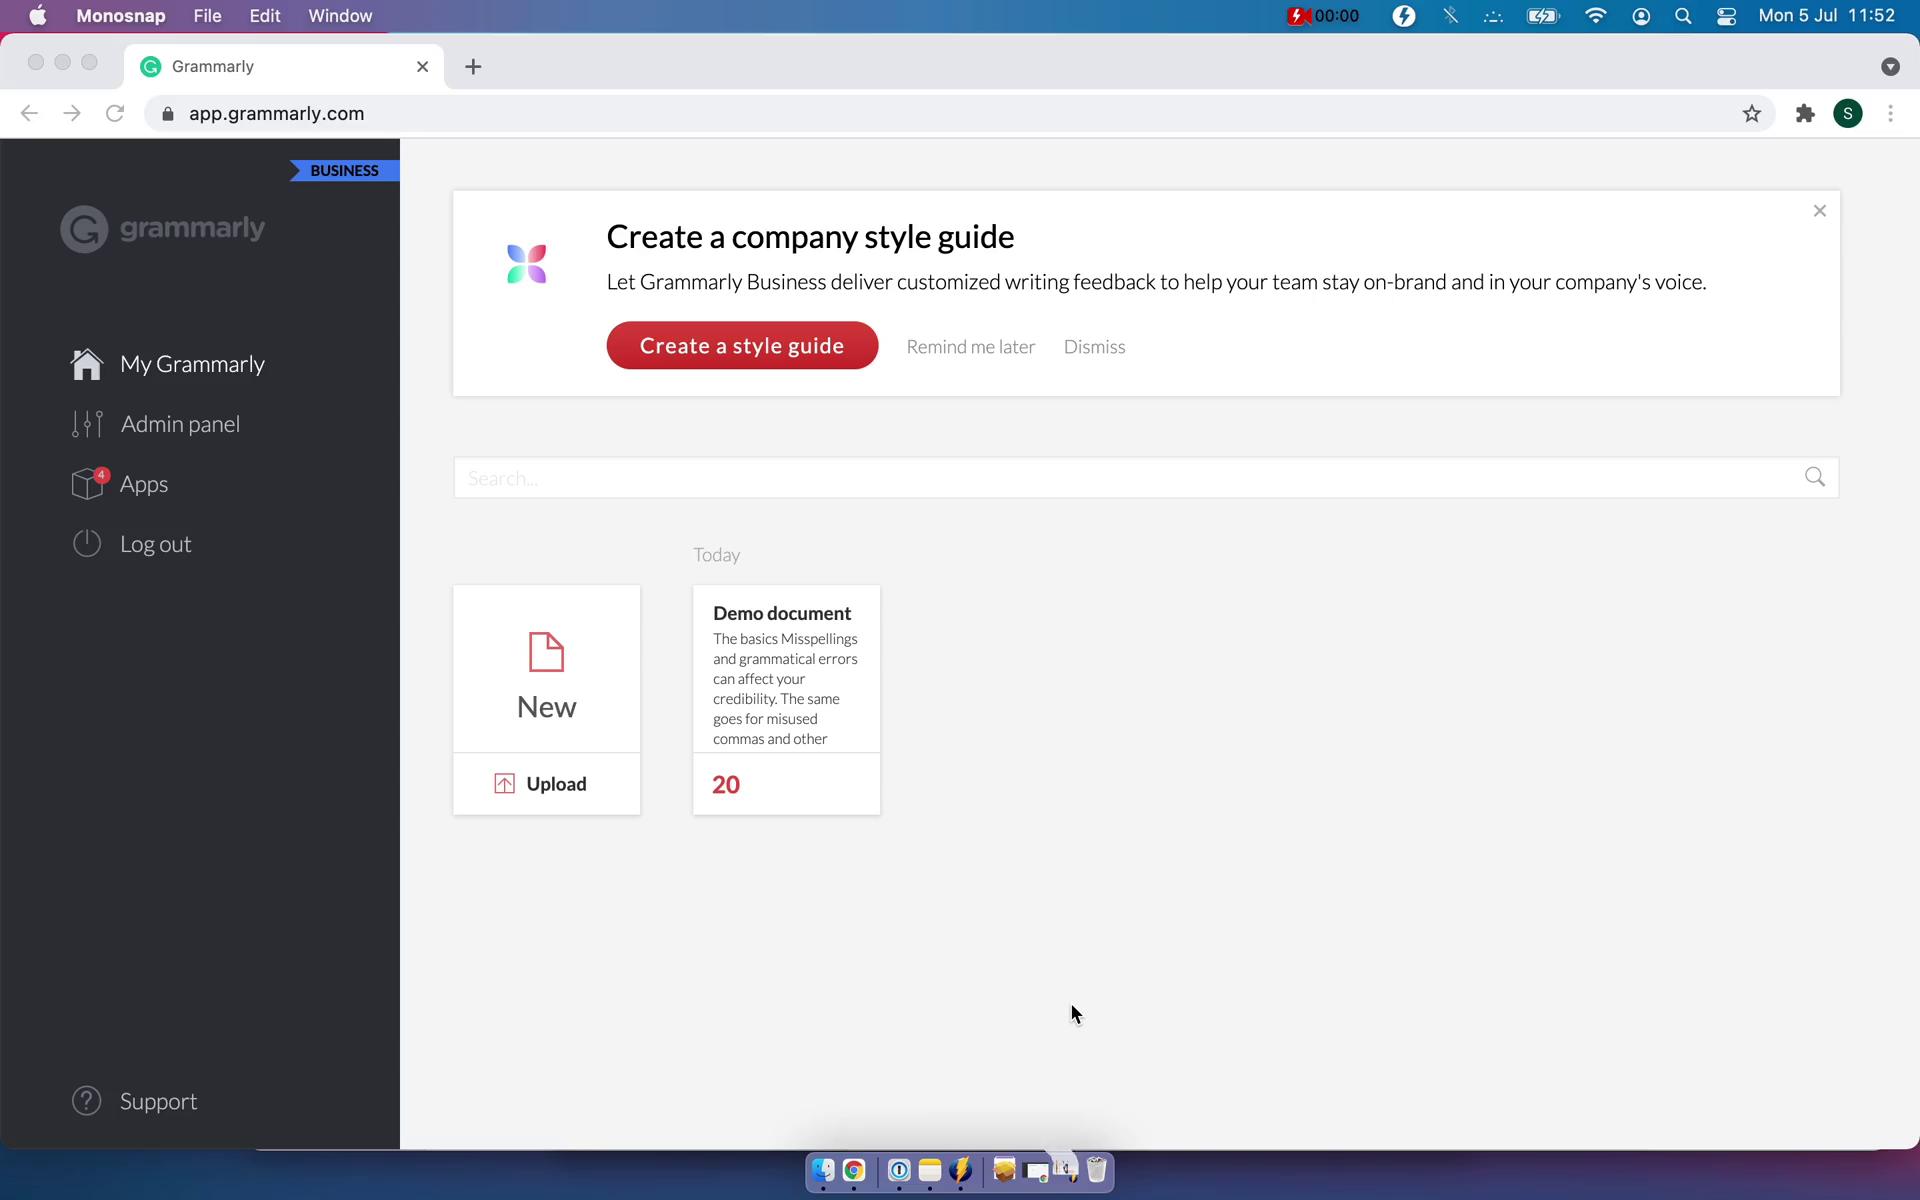 Screenshot of Dashboard on Creating a document on Grammarly user flow